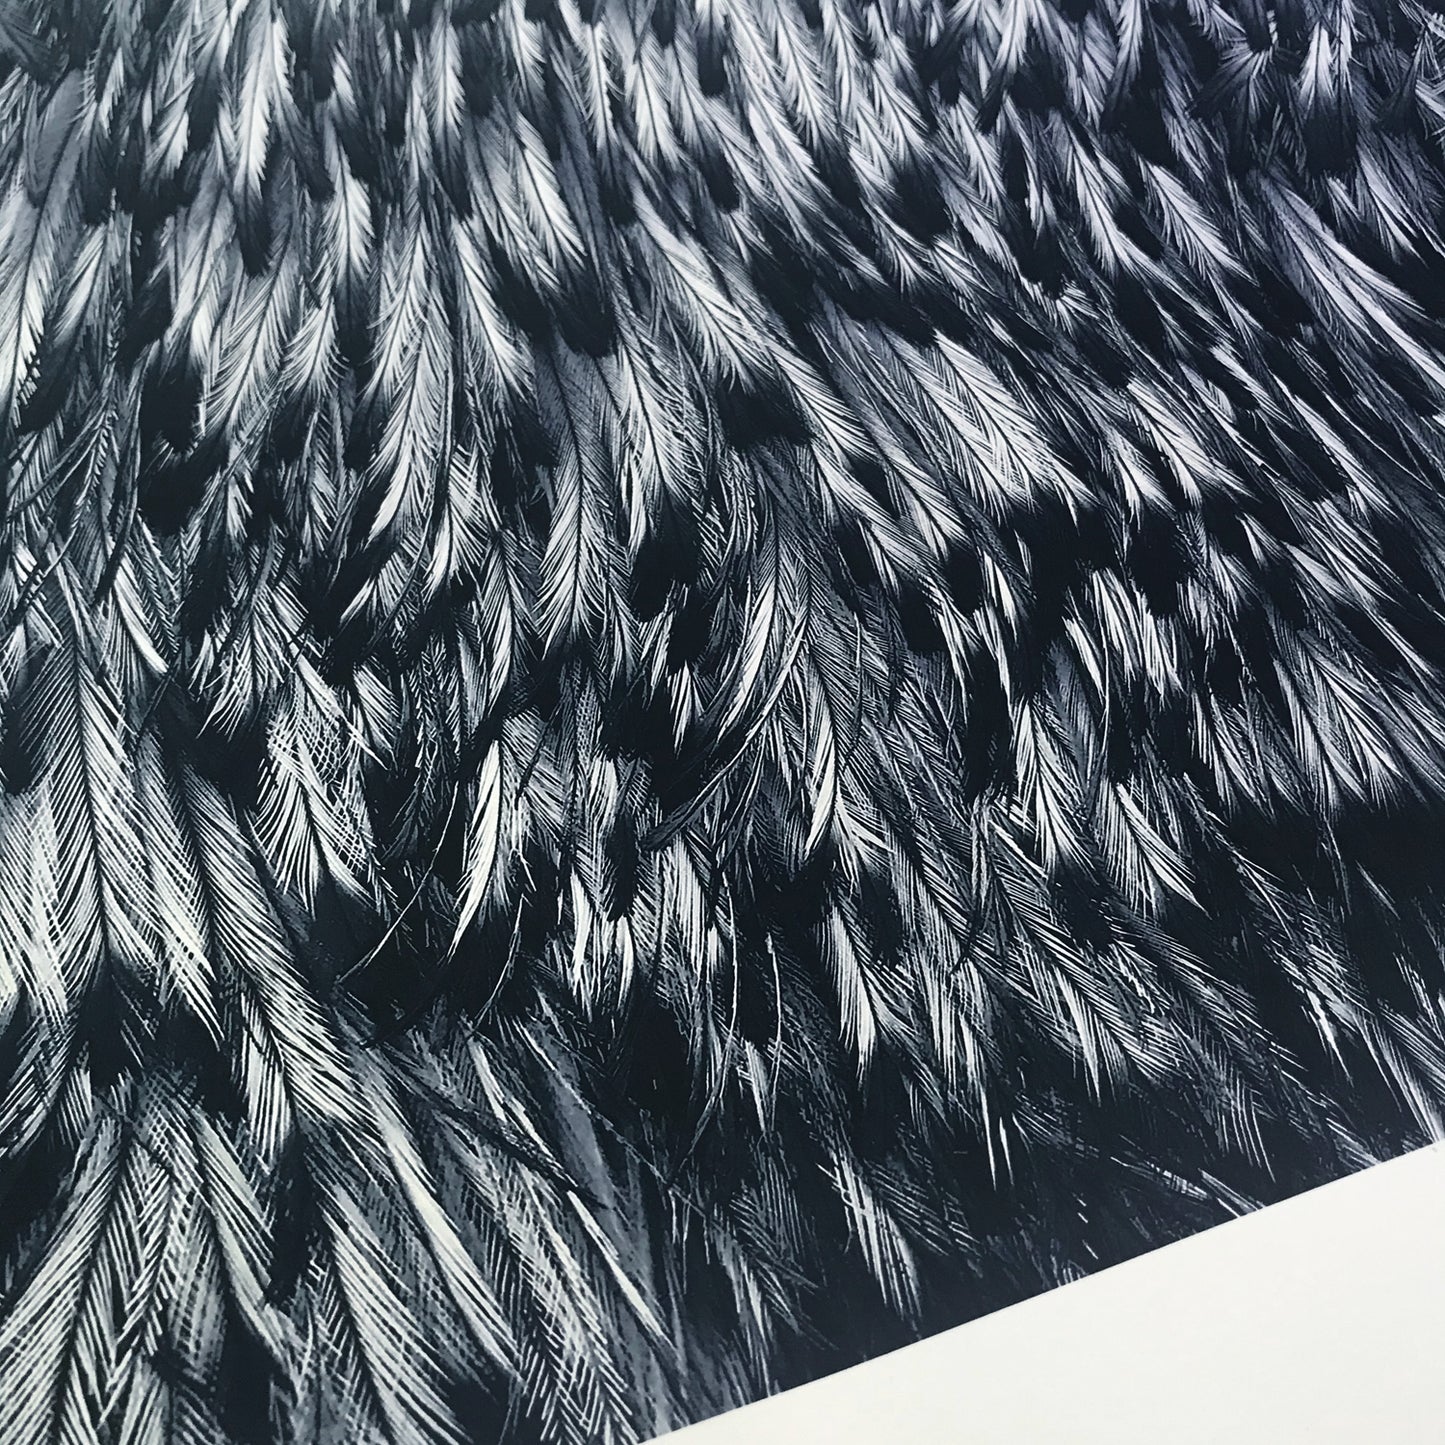 Emu feathers limited edition print